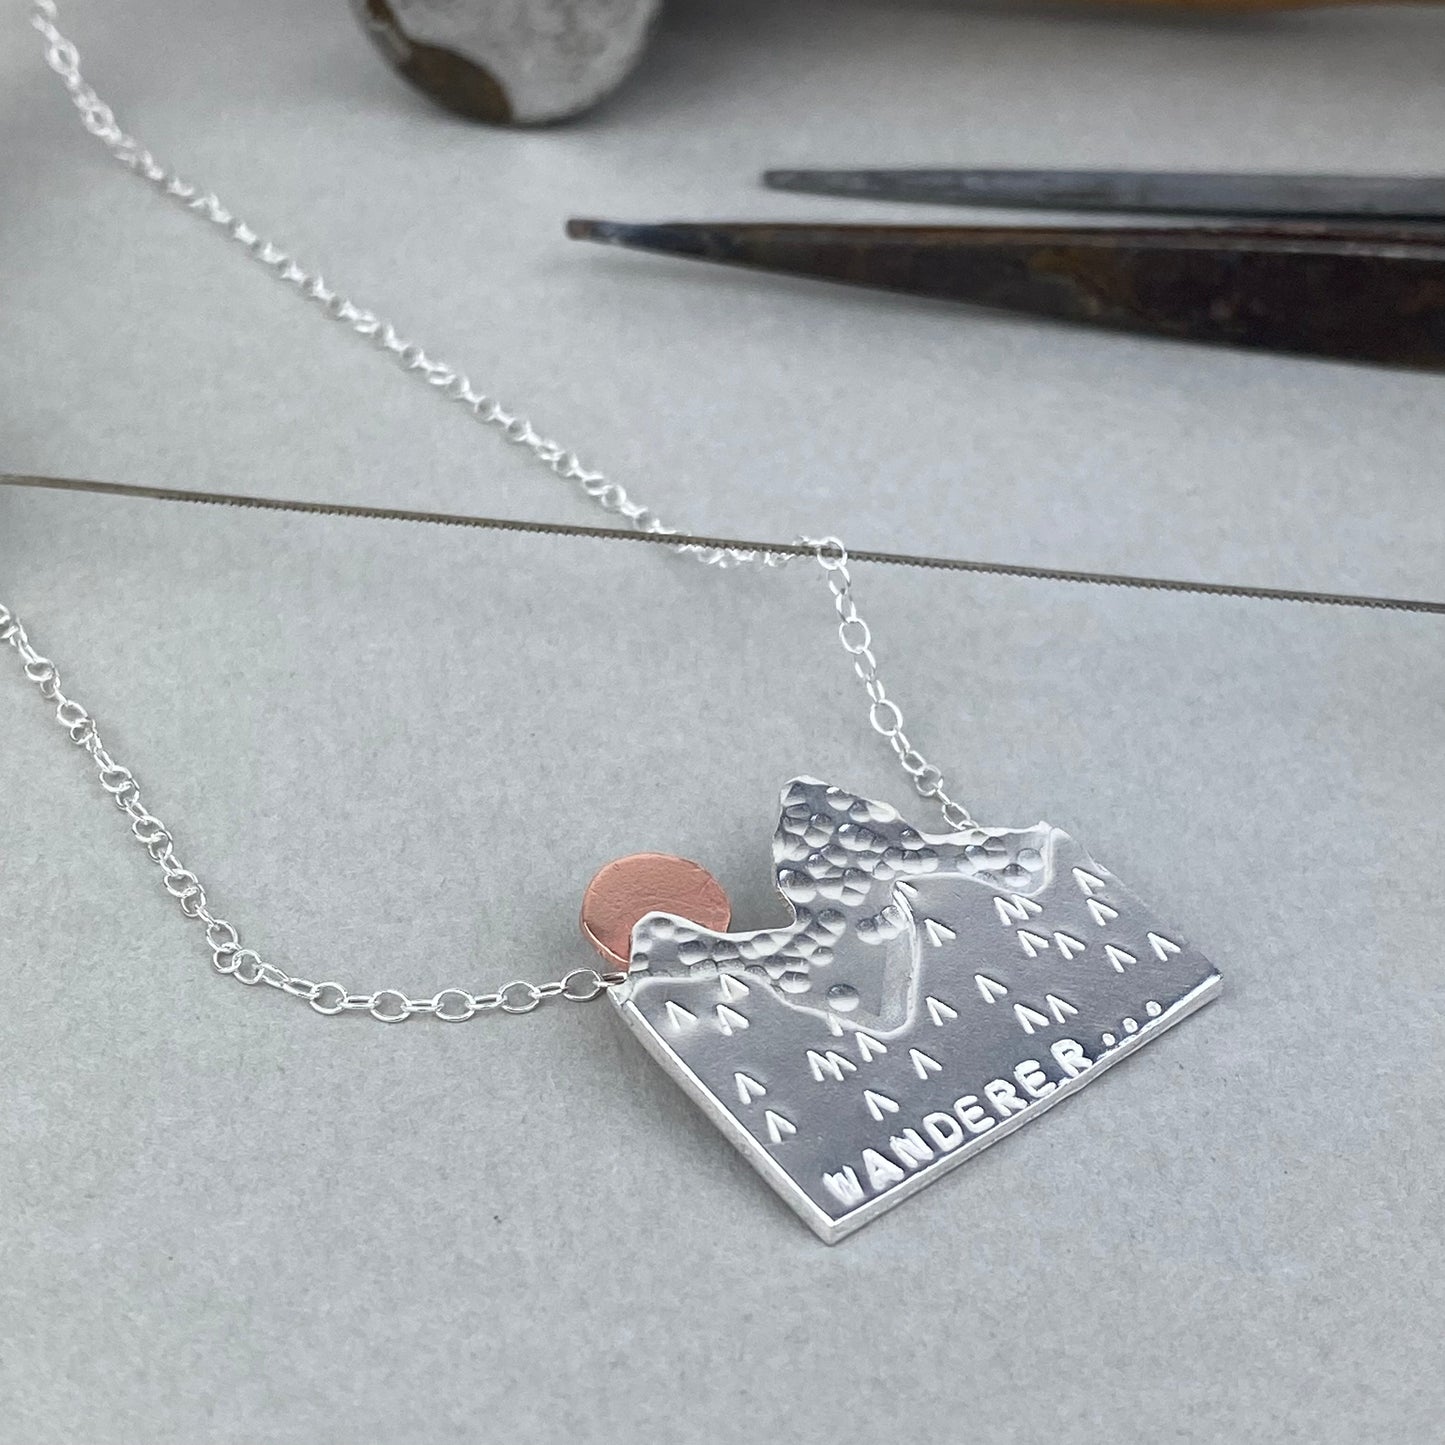 Design Your Own Silver Necklace Friday 17th March 2023 - 10 - 3.30pm